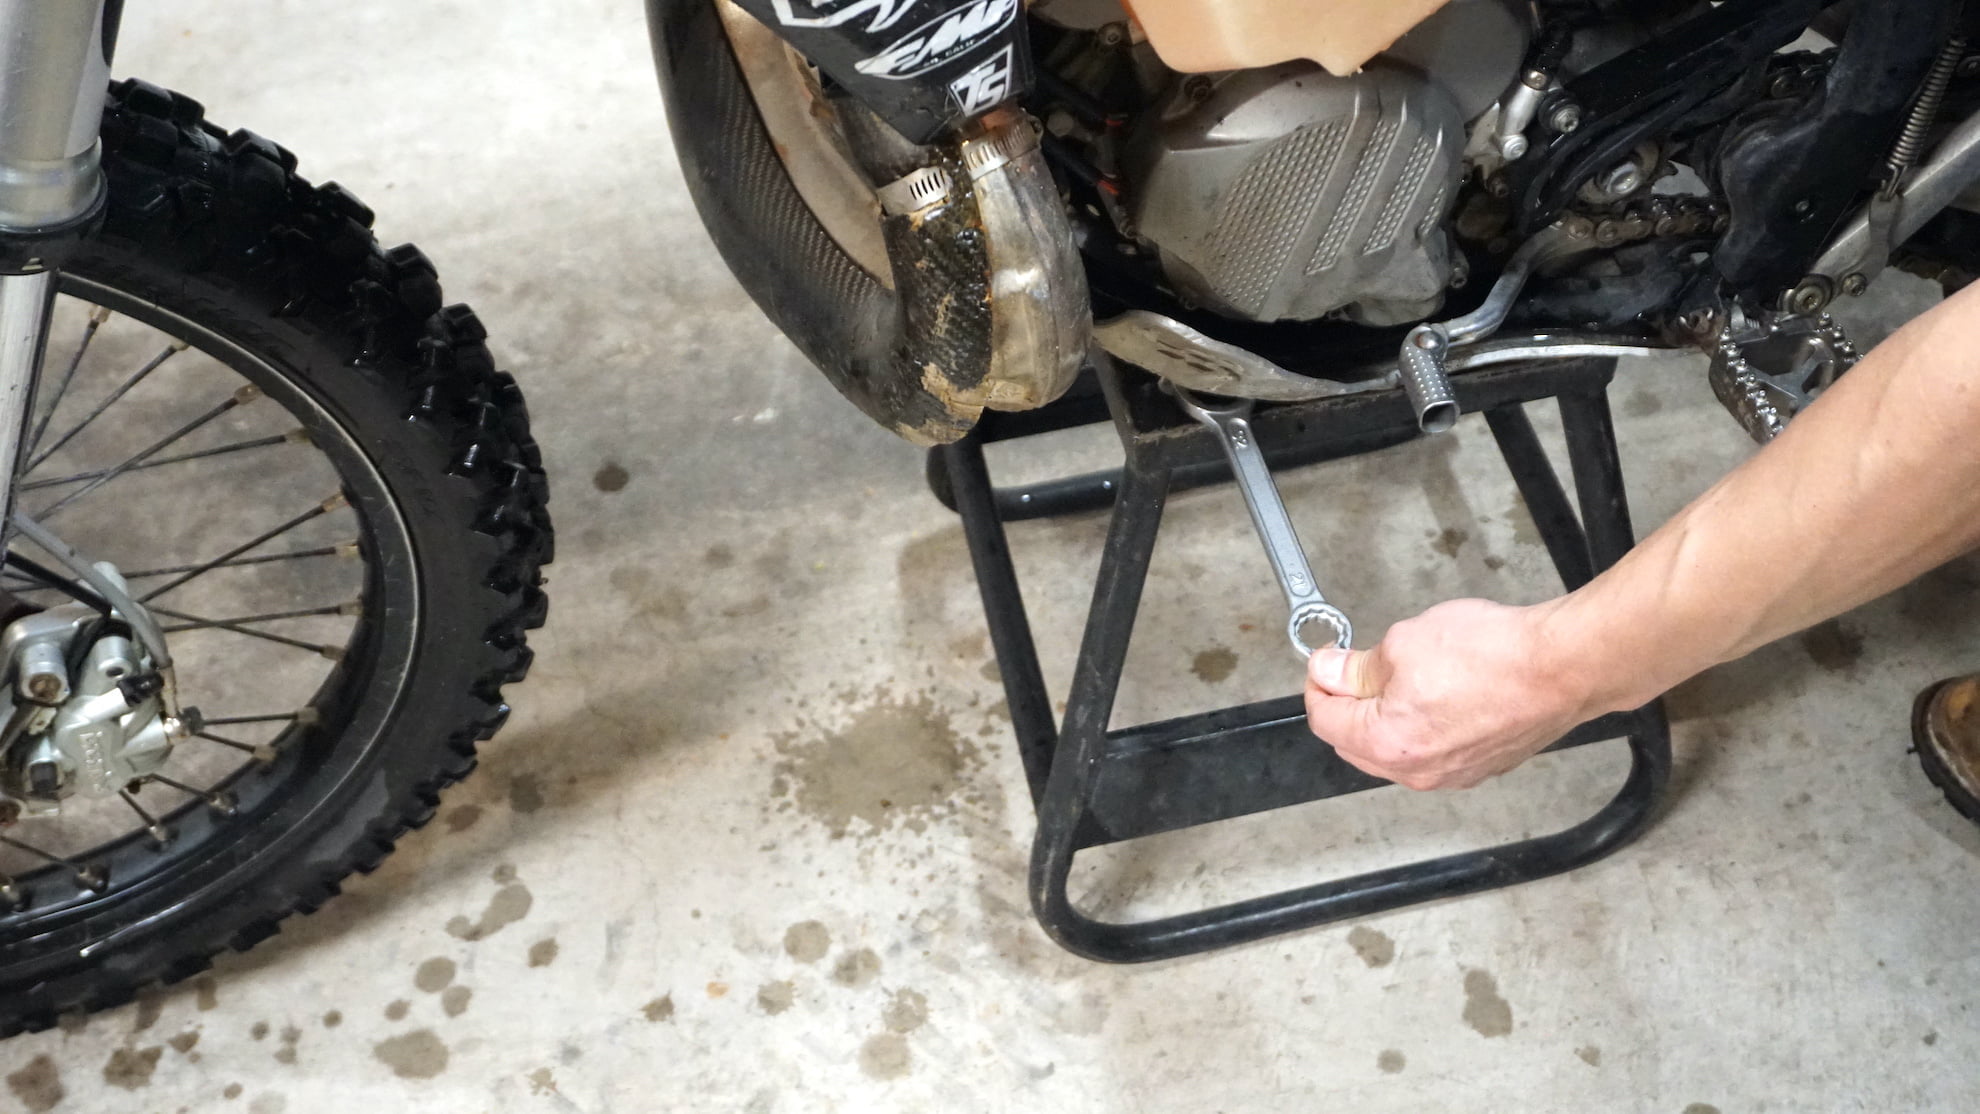 Dirt bike on a center stand with hand pushing a wrench under the skid plate